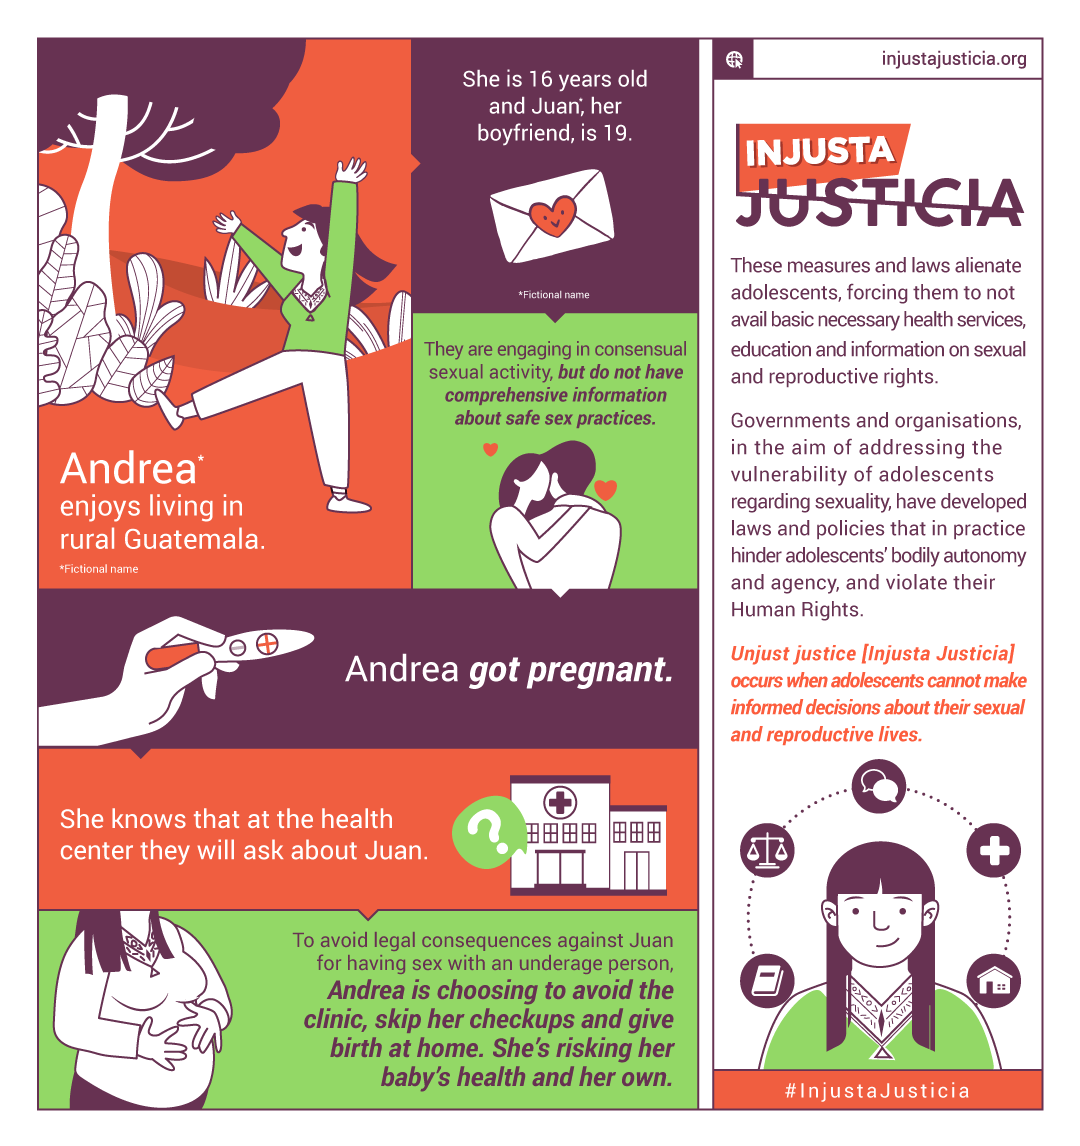 Infographic about Andrea's case, which is explained below. Full description available for download.